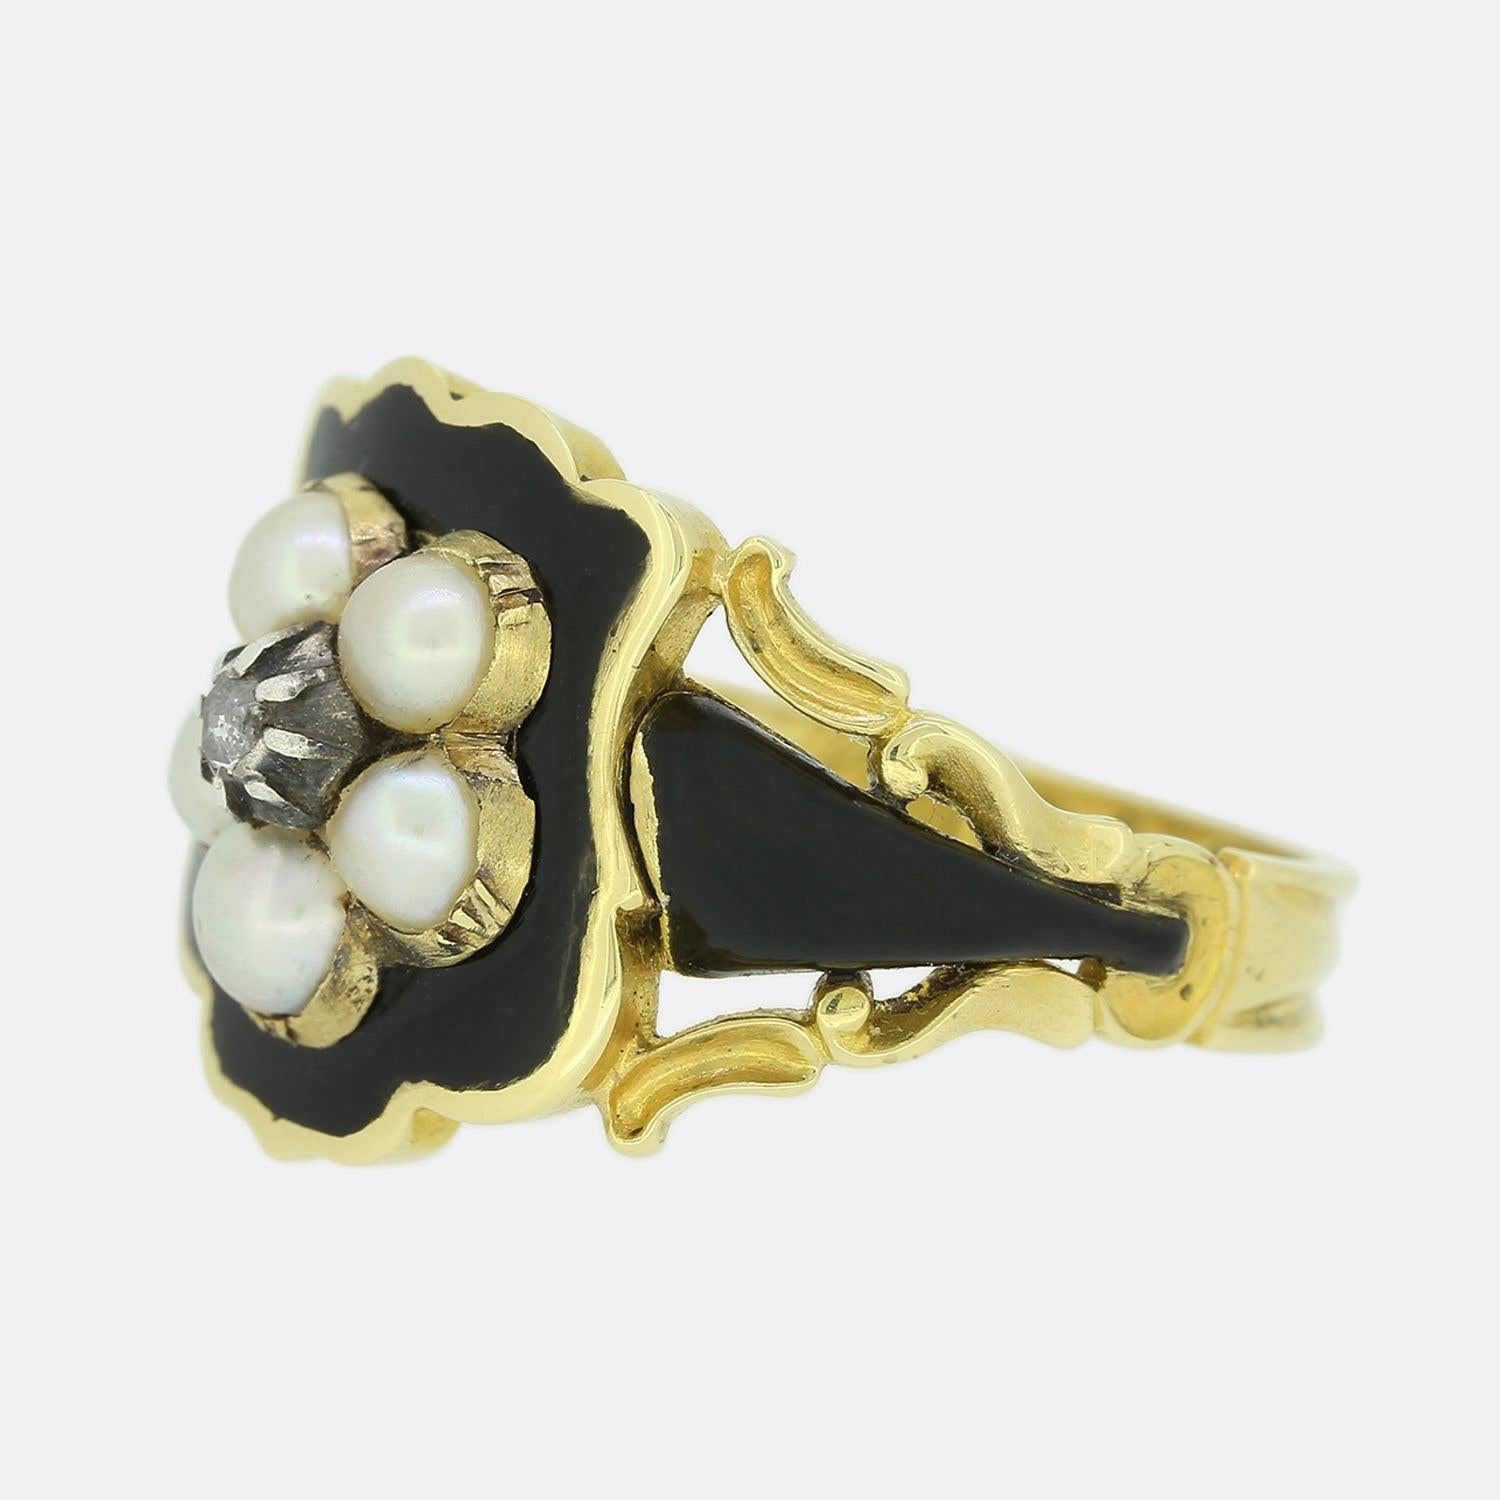 This is a wonderfully hand made yellow gold Georgian mourning ring. The ring is set with a central rose cut diamond in a cut collet setting and is surrounded by five original natural pearls. Fine black enamelling fills a shielded face and continues